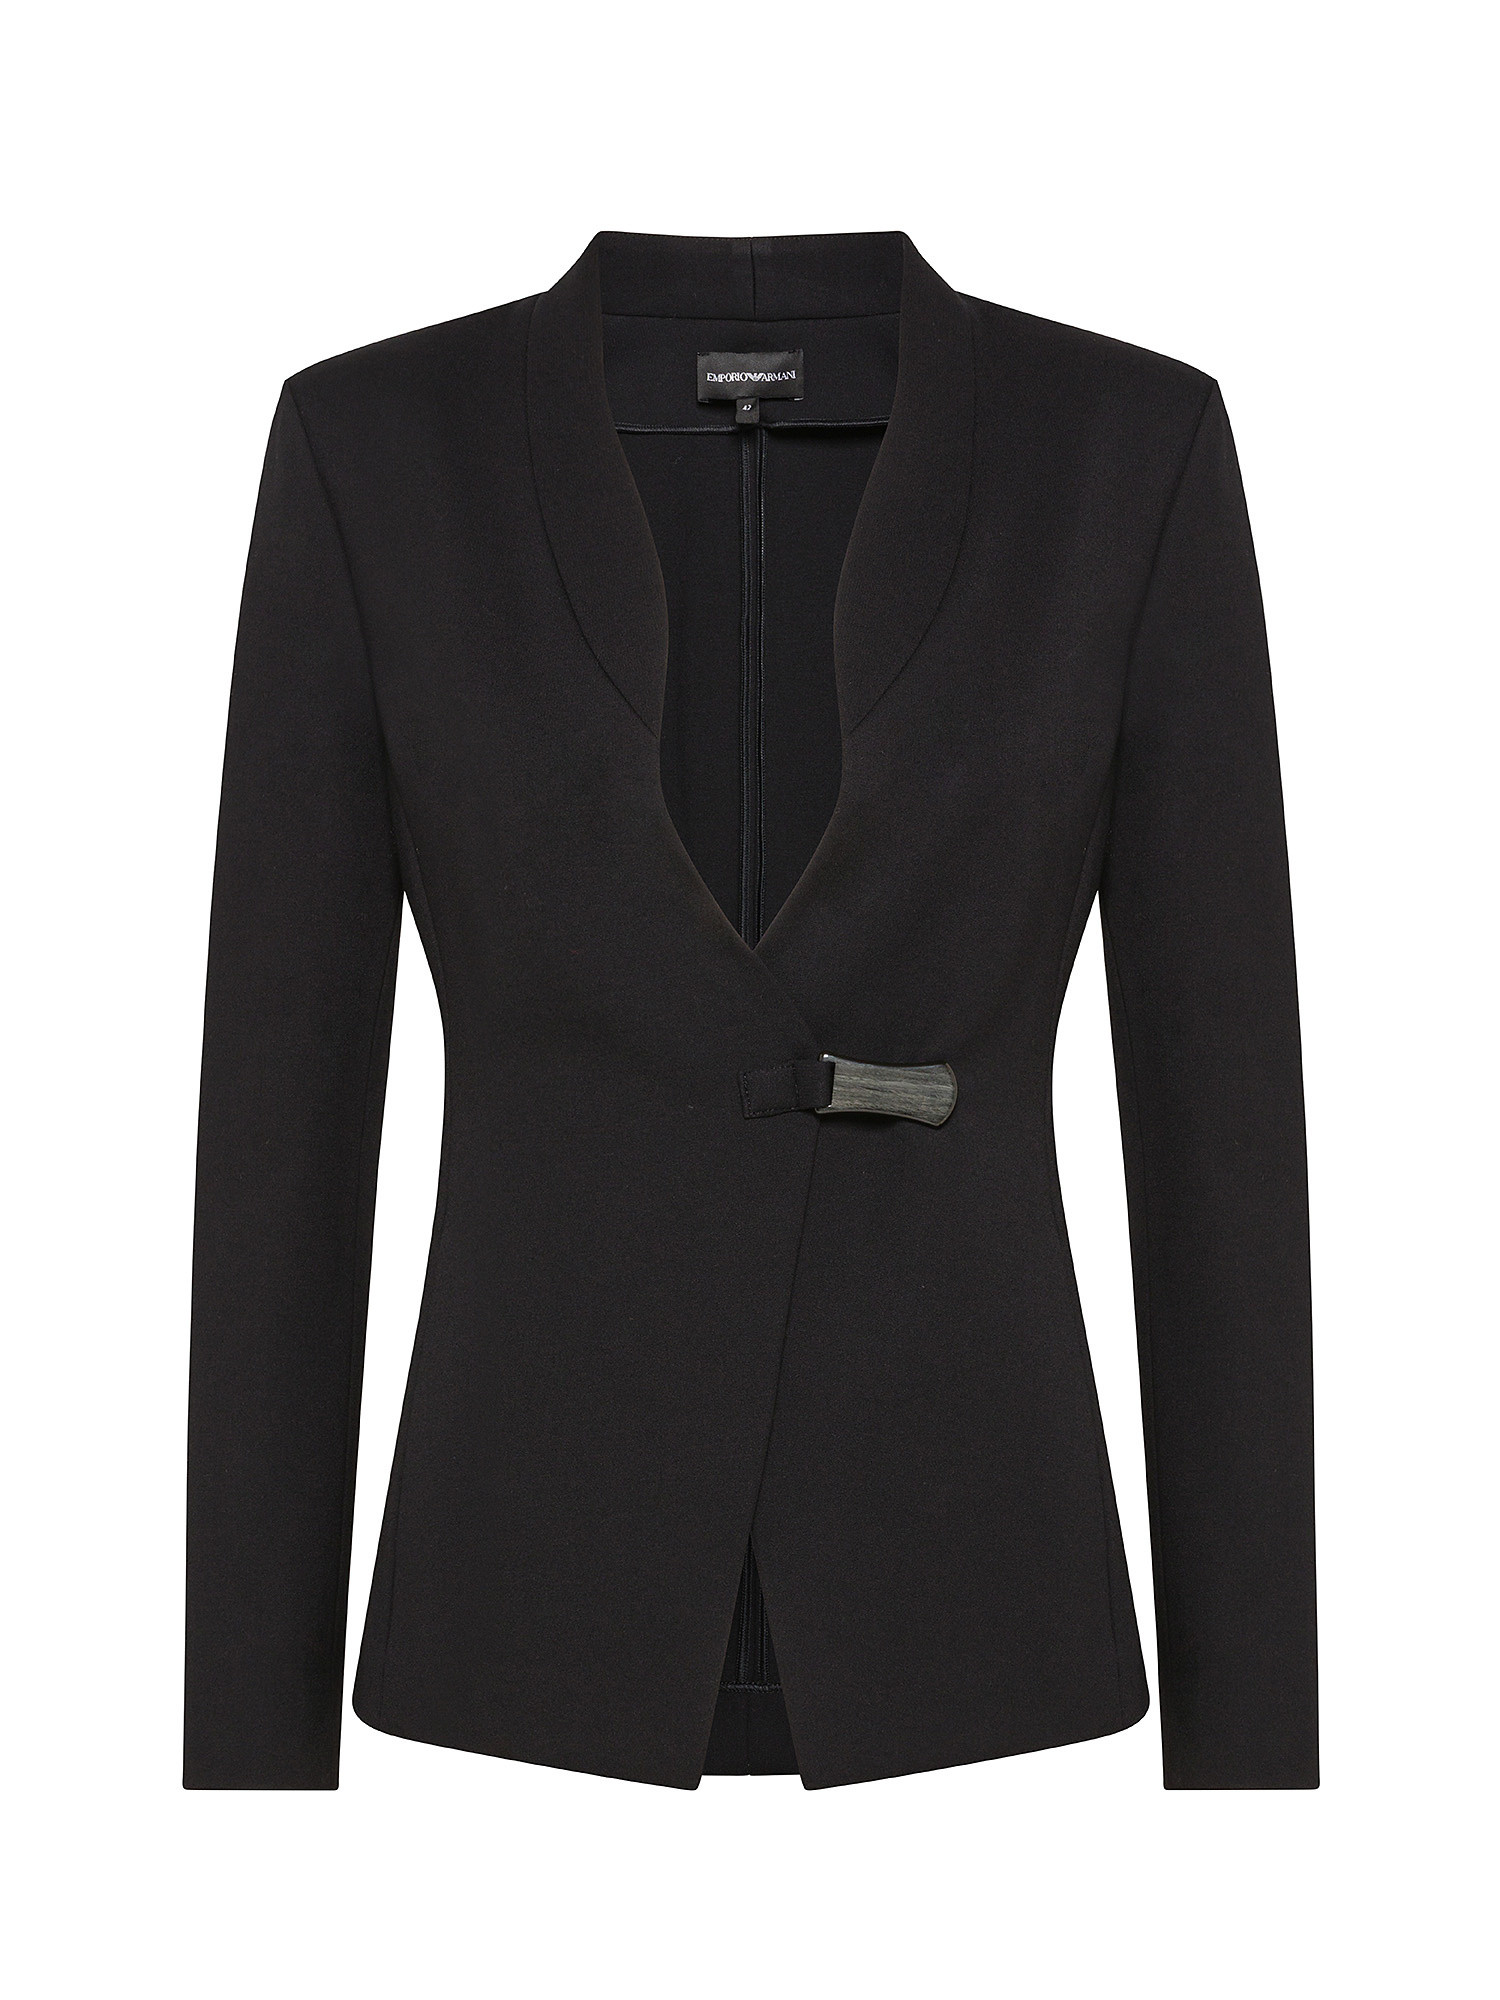 Emporio Armani - Blazer in Milano stitch fabric with buckle, Black, large image number 0